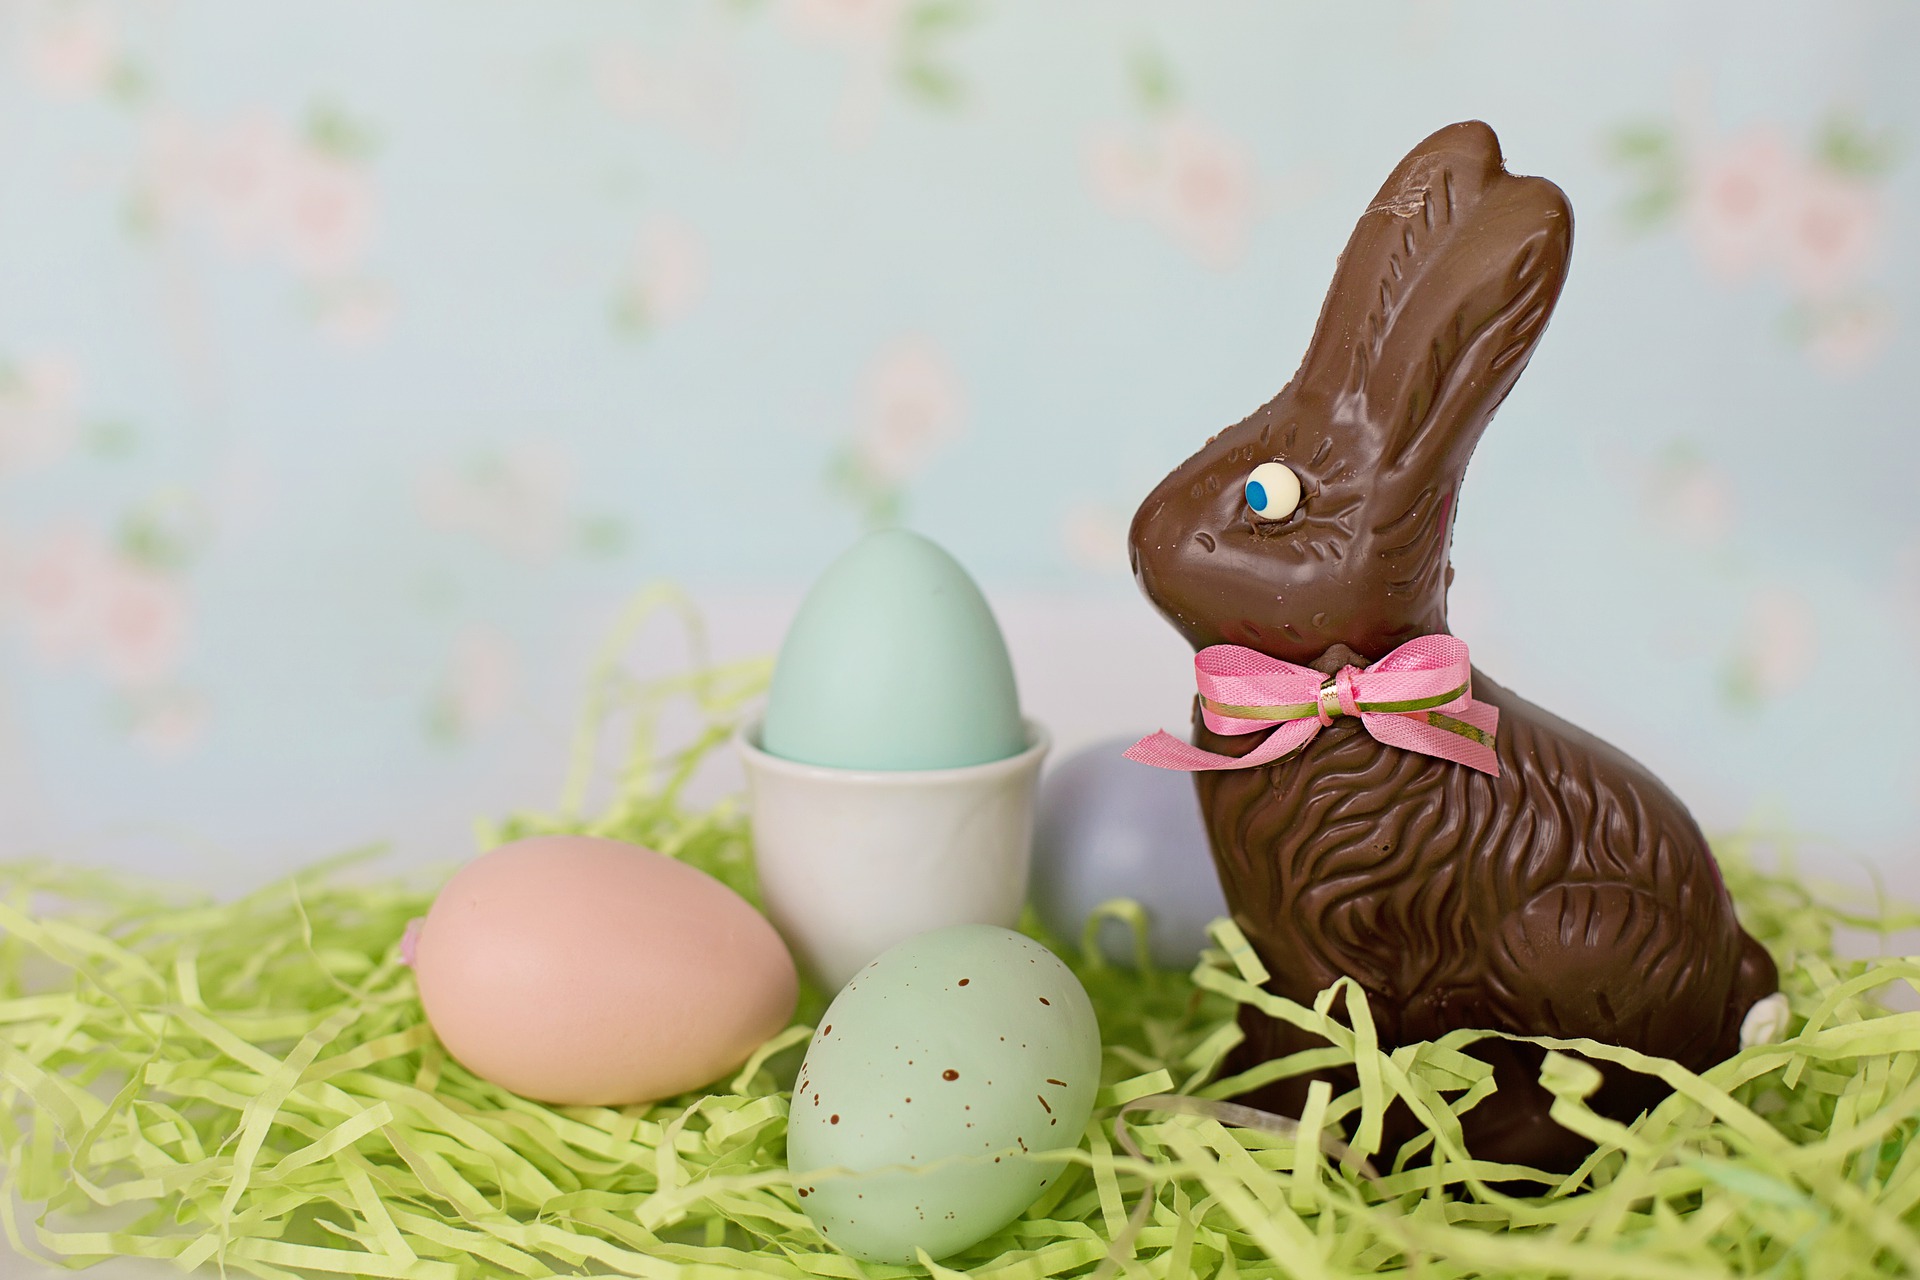 What Was In Your Chocolate This Easter?